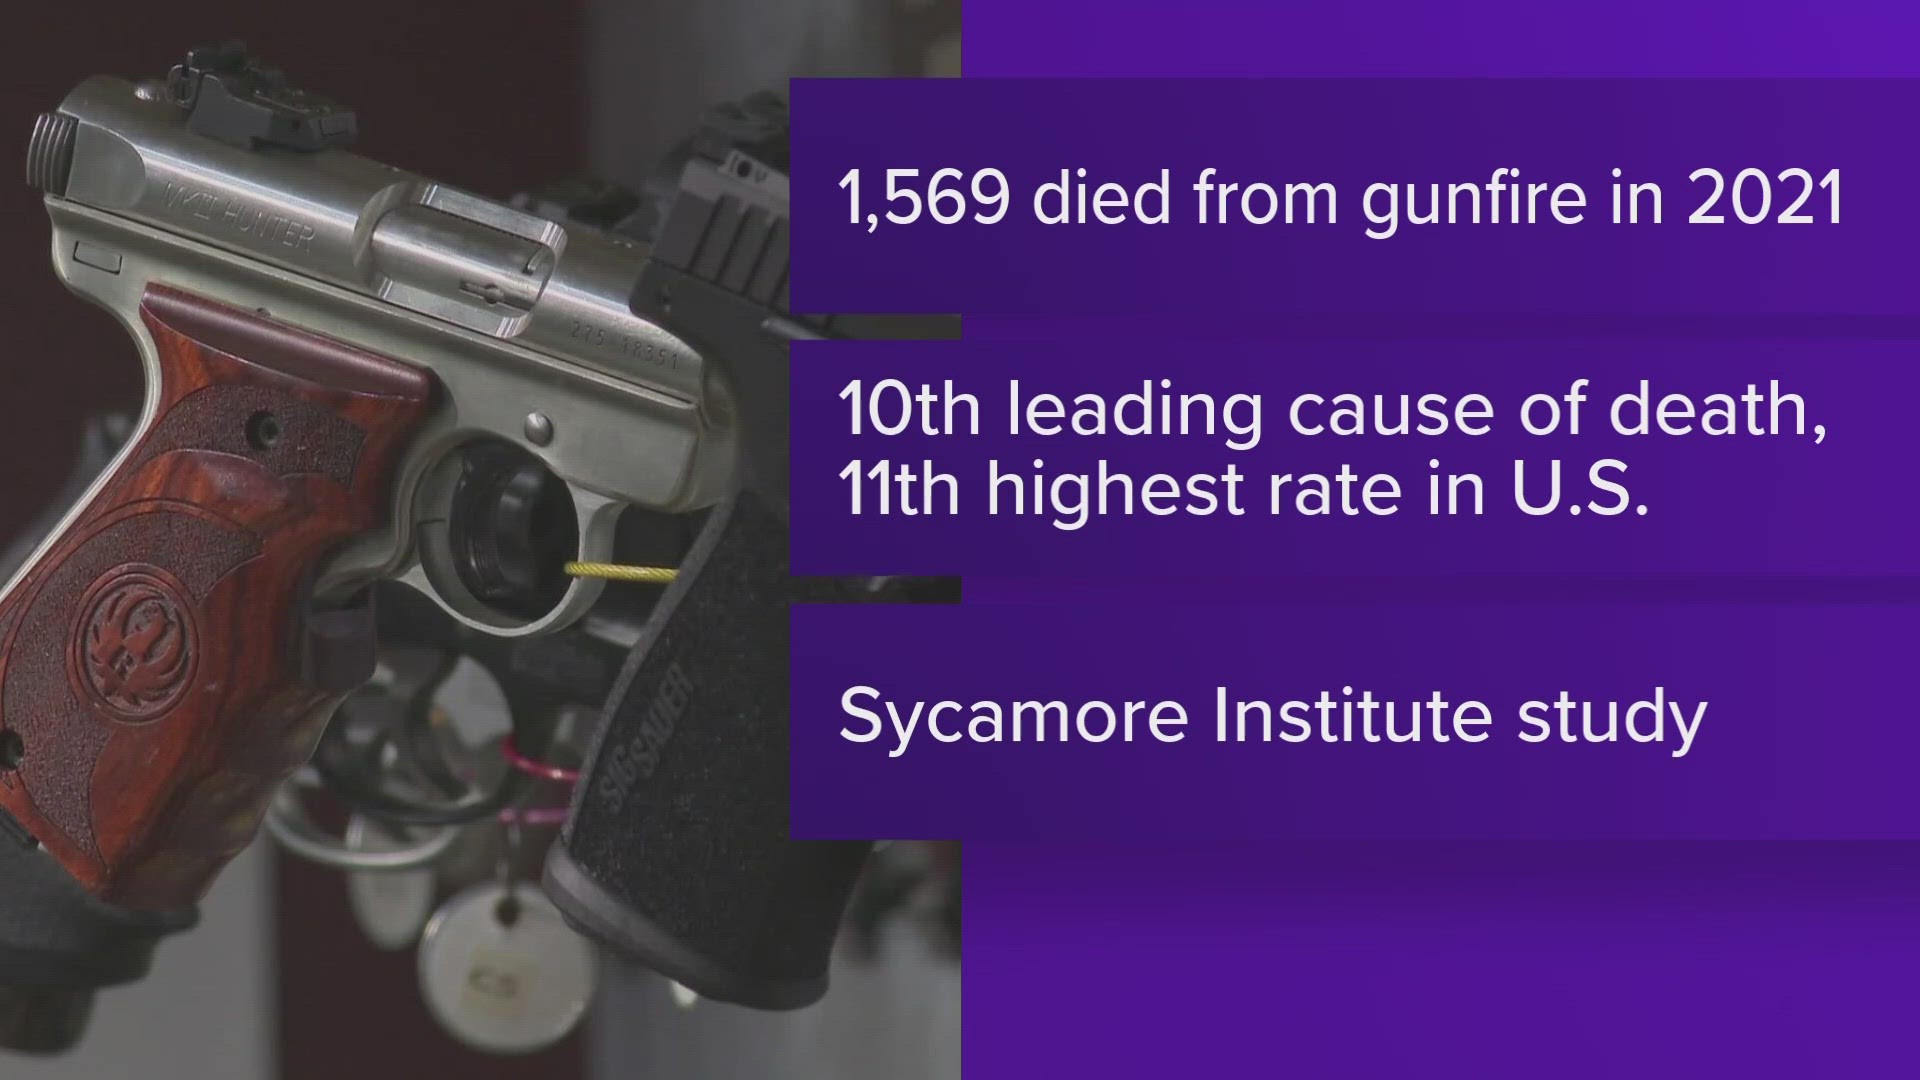 The Sycamore Institute said 1,569 residents of Tennessee in total died due to gun violence.